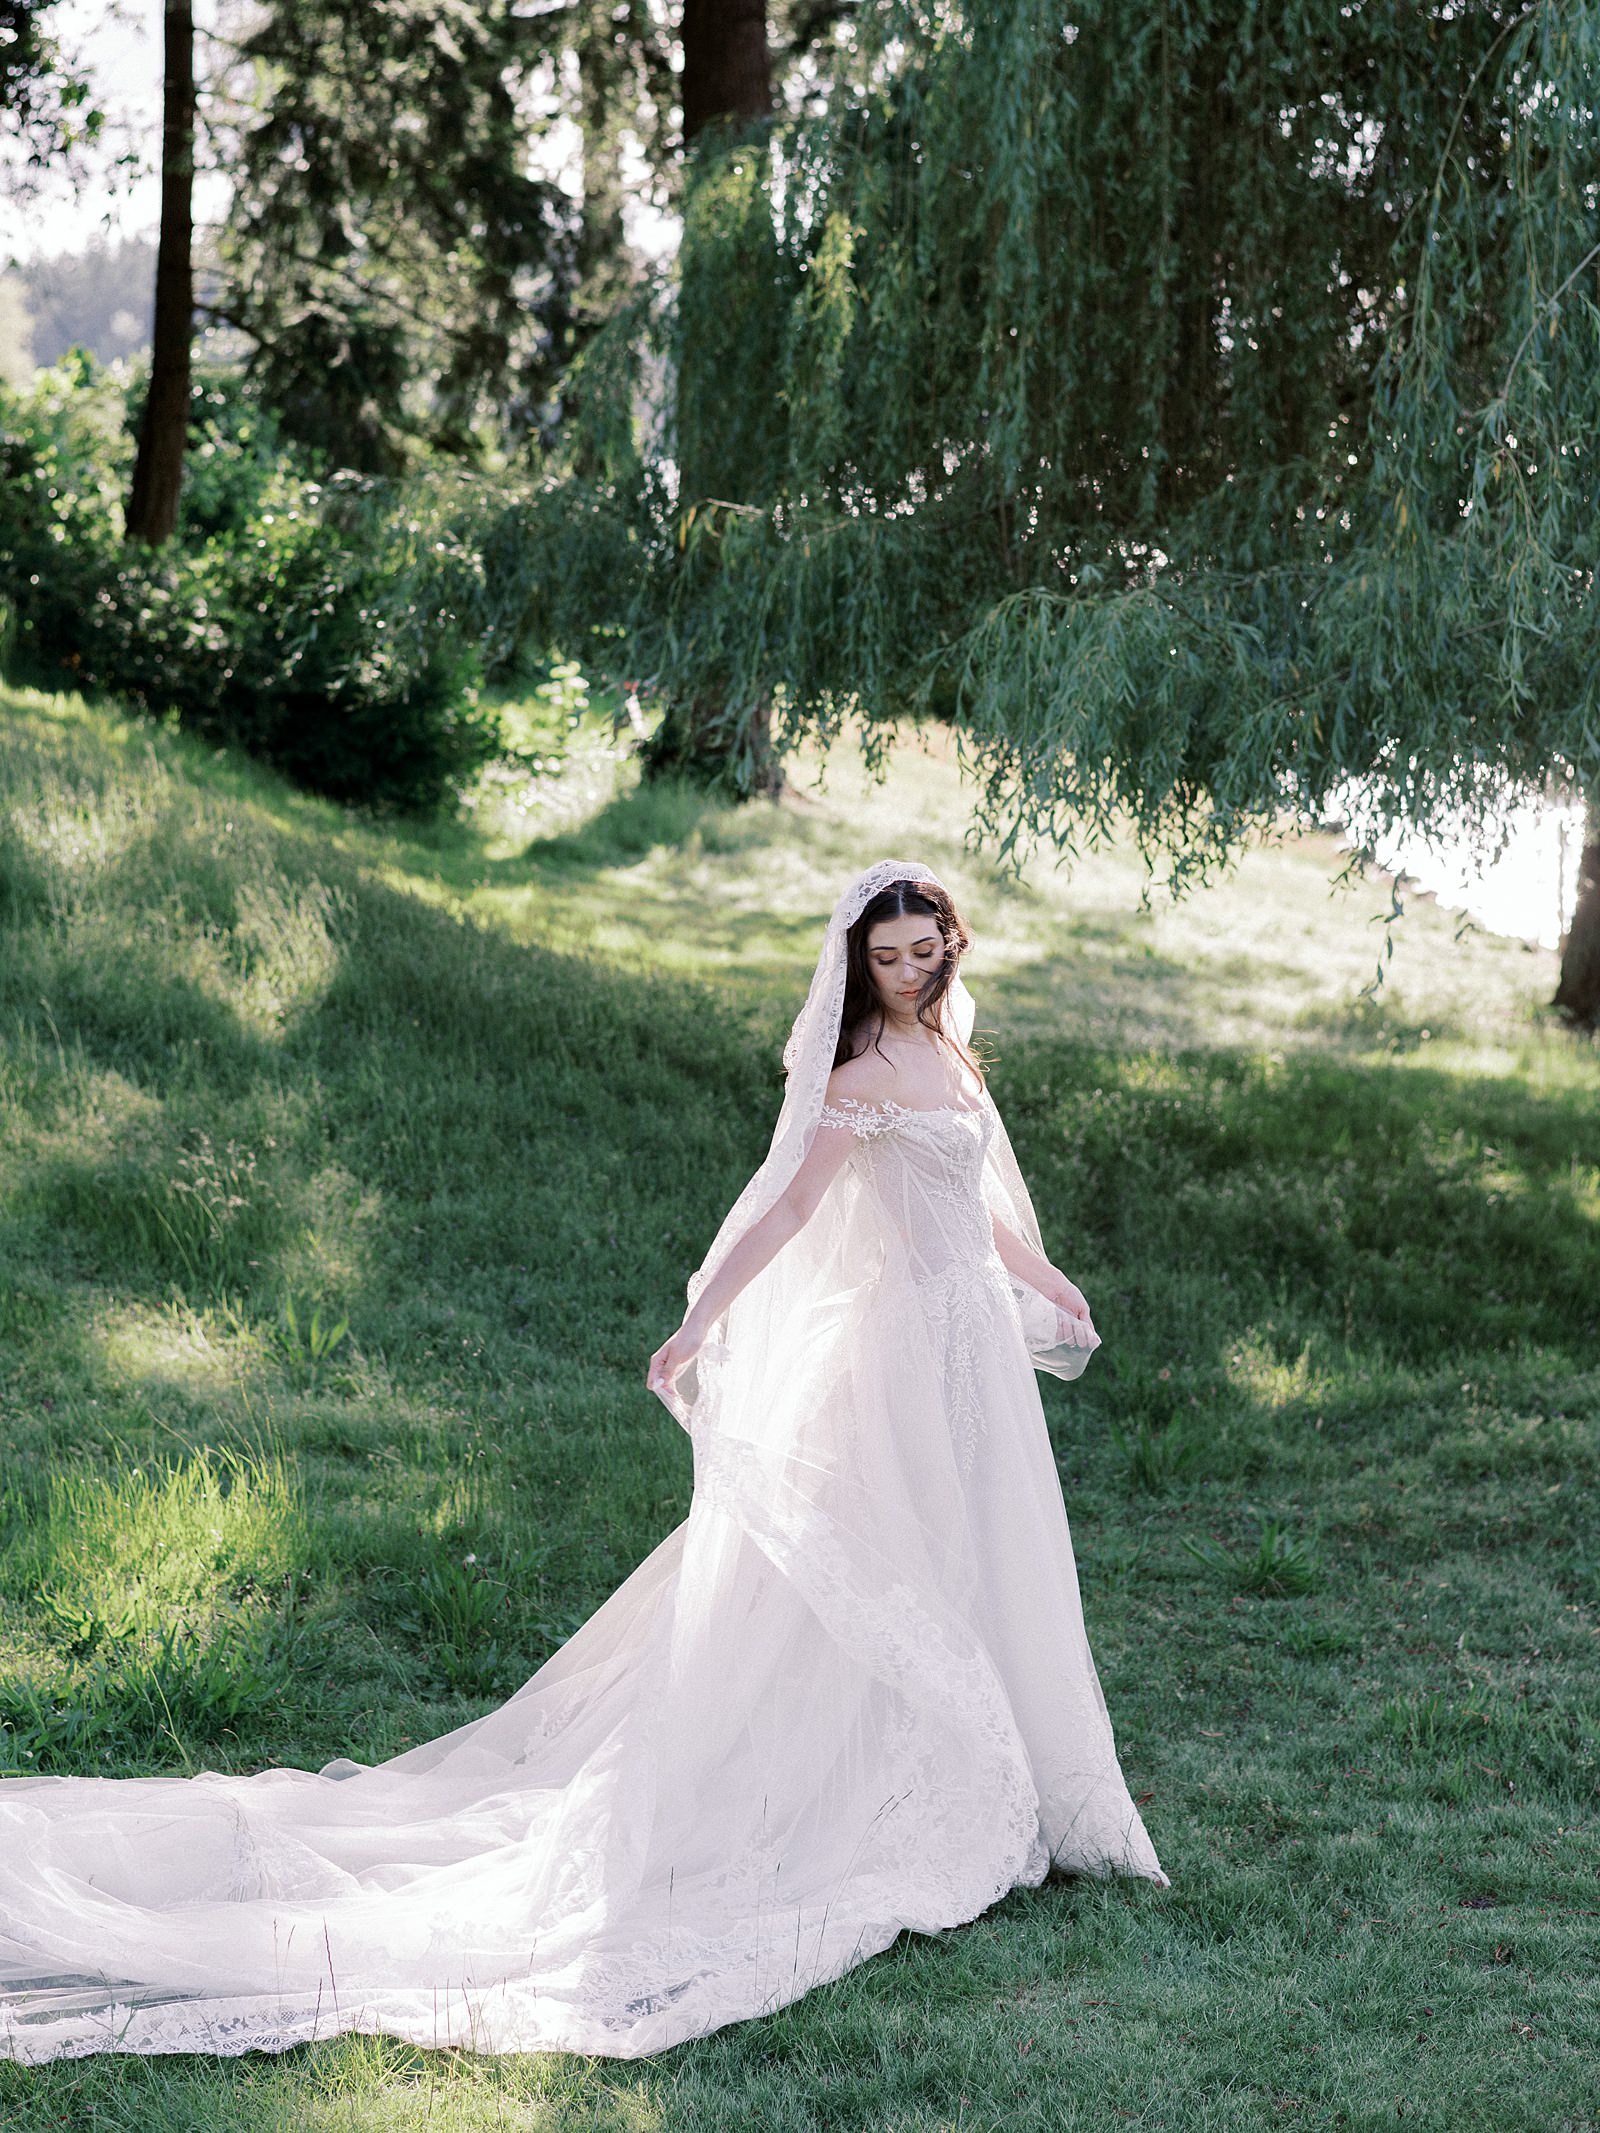 Bride in windswept portrait by the willow tree of Thornewood Castle in dramatic wedding gown - Jacqueline Benét Photography